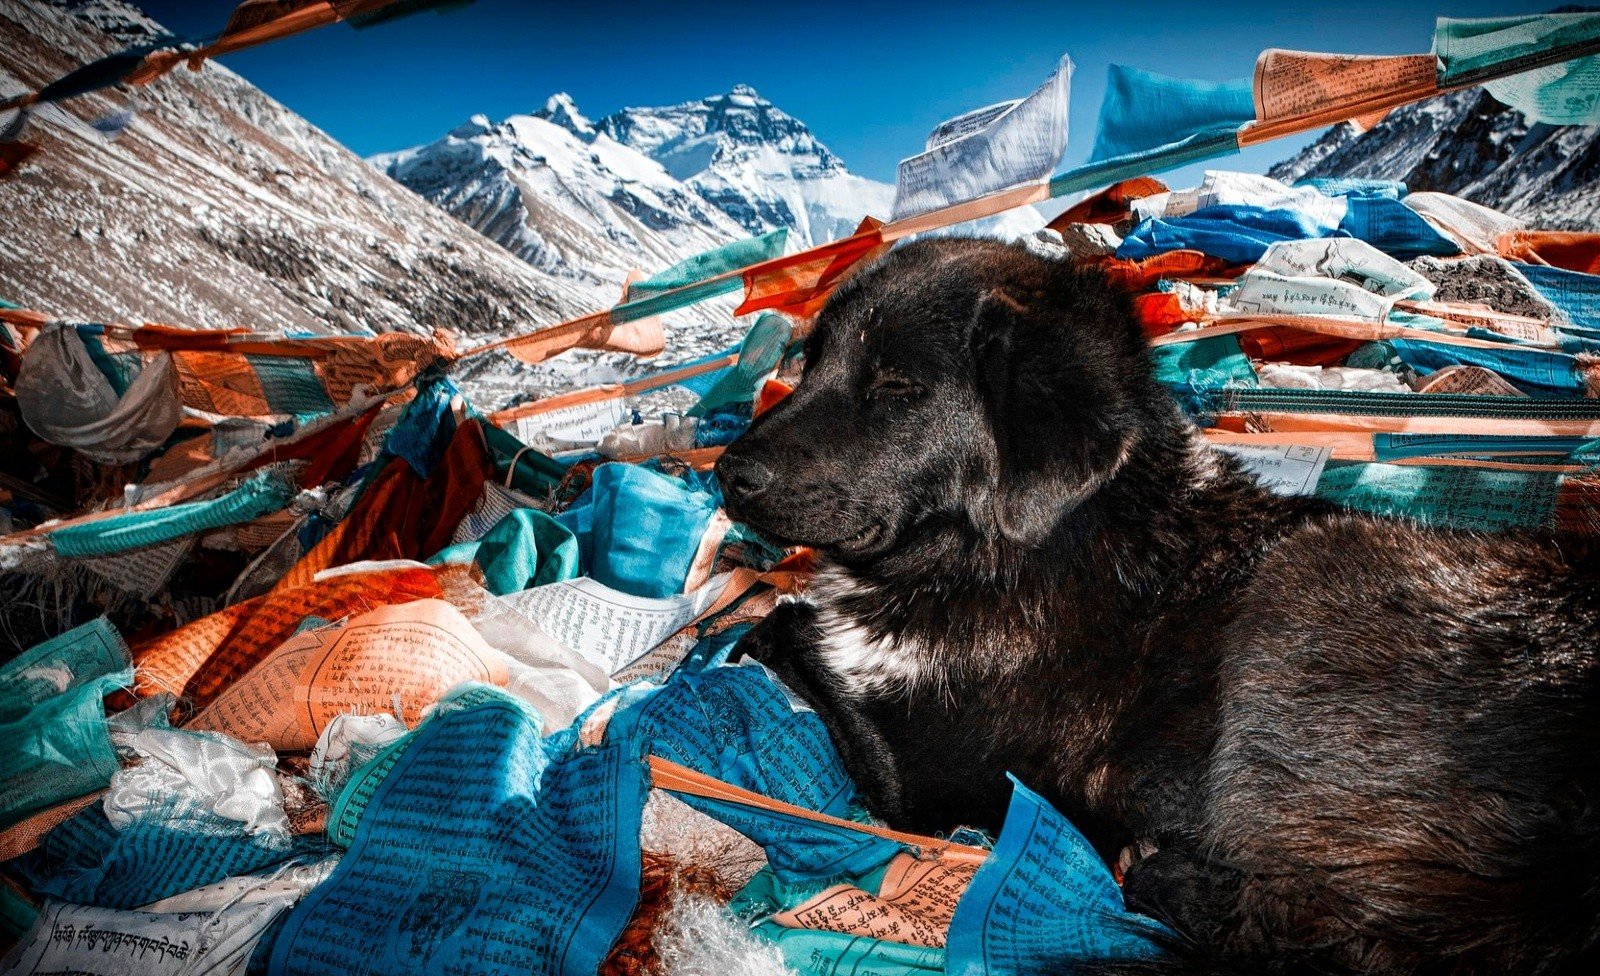 A dog seen on the trek to Everest Base Camp